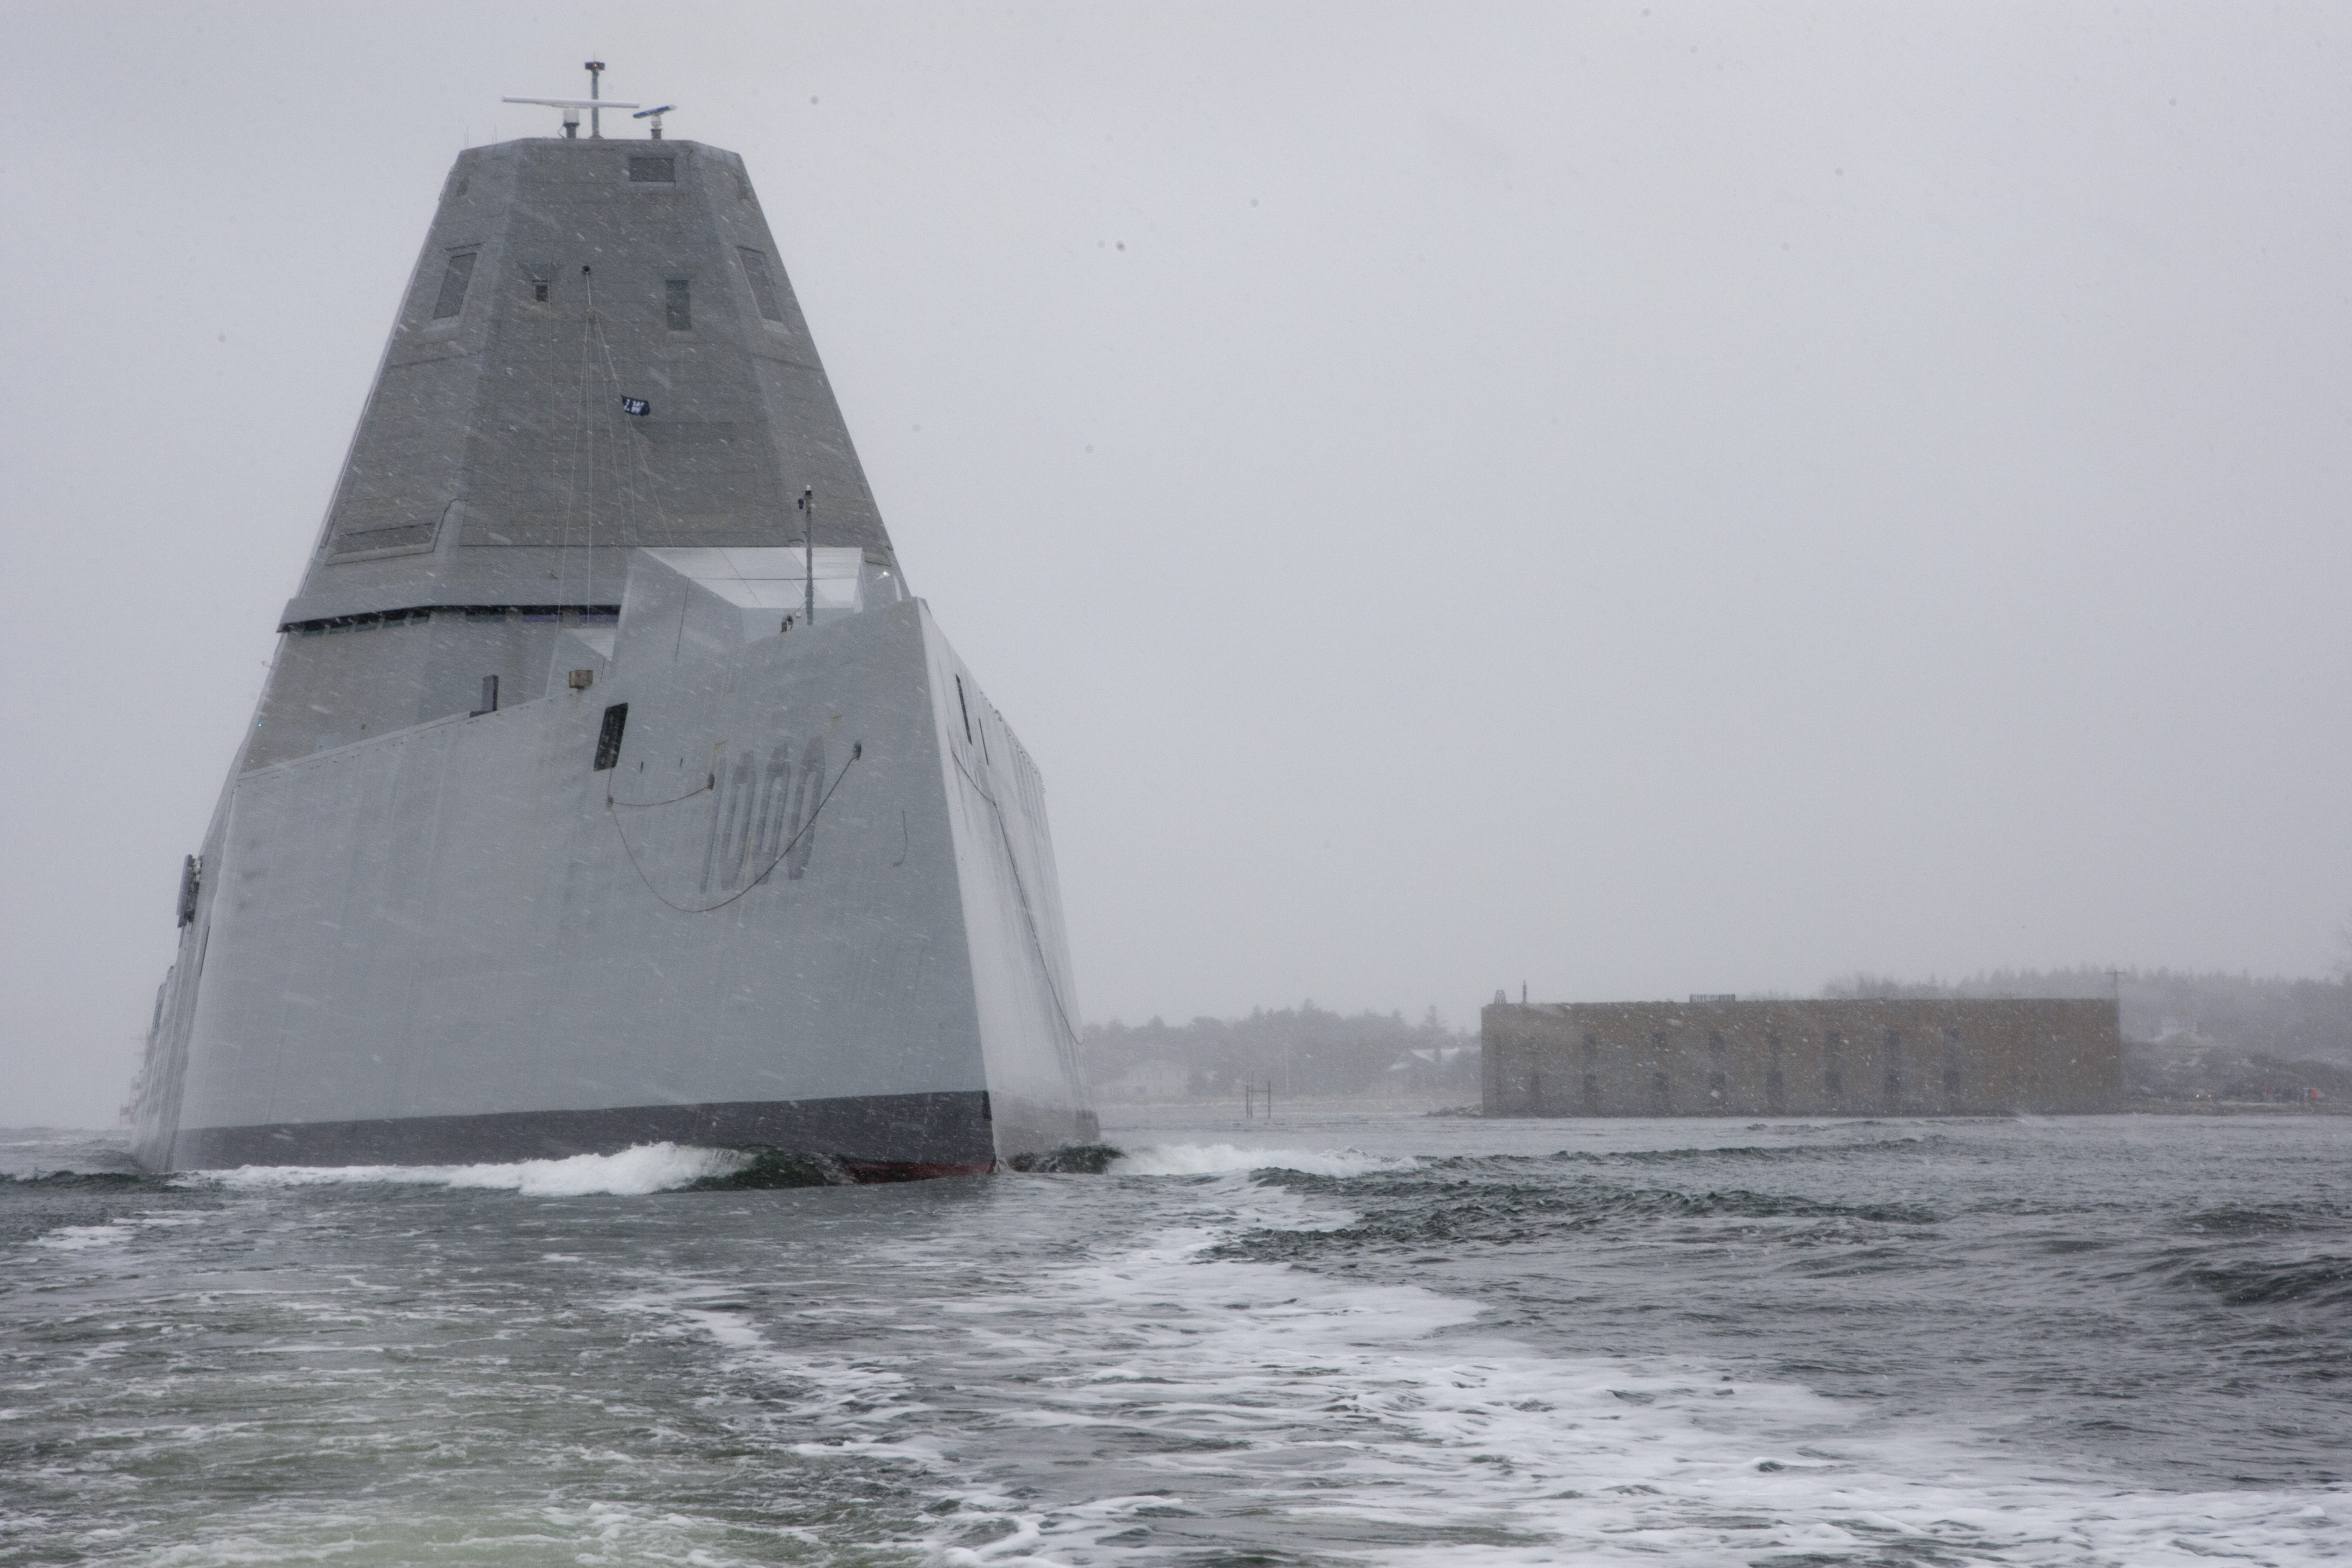 The guided- missile destroyer Zumwalt (DDG-1000) departs the Bath Iron Works shipyard on March 24, 2016. US Navy Photo